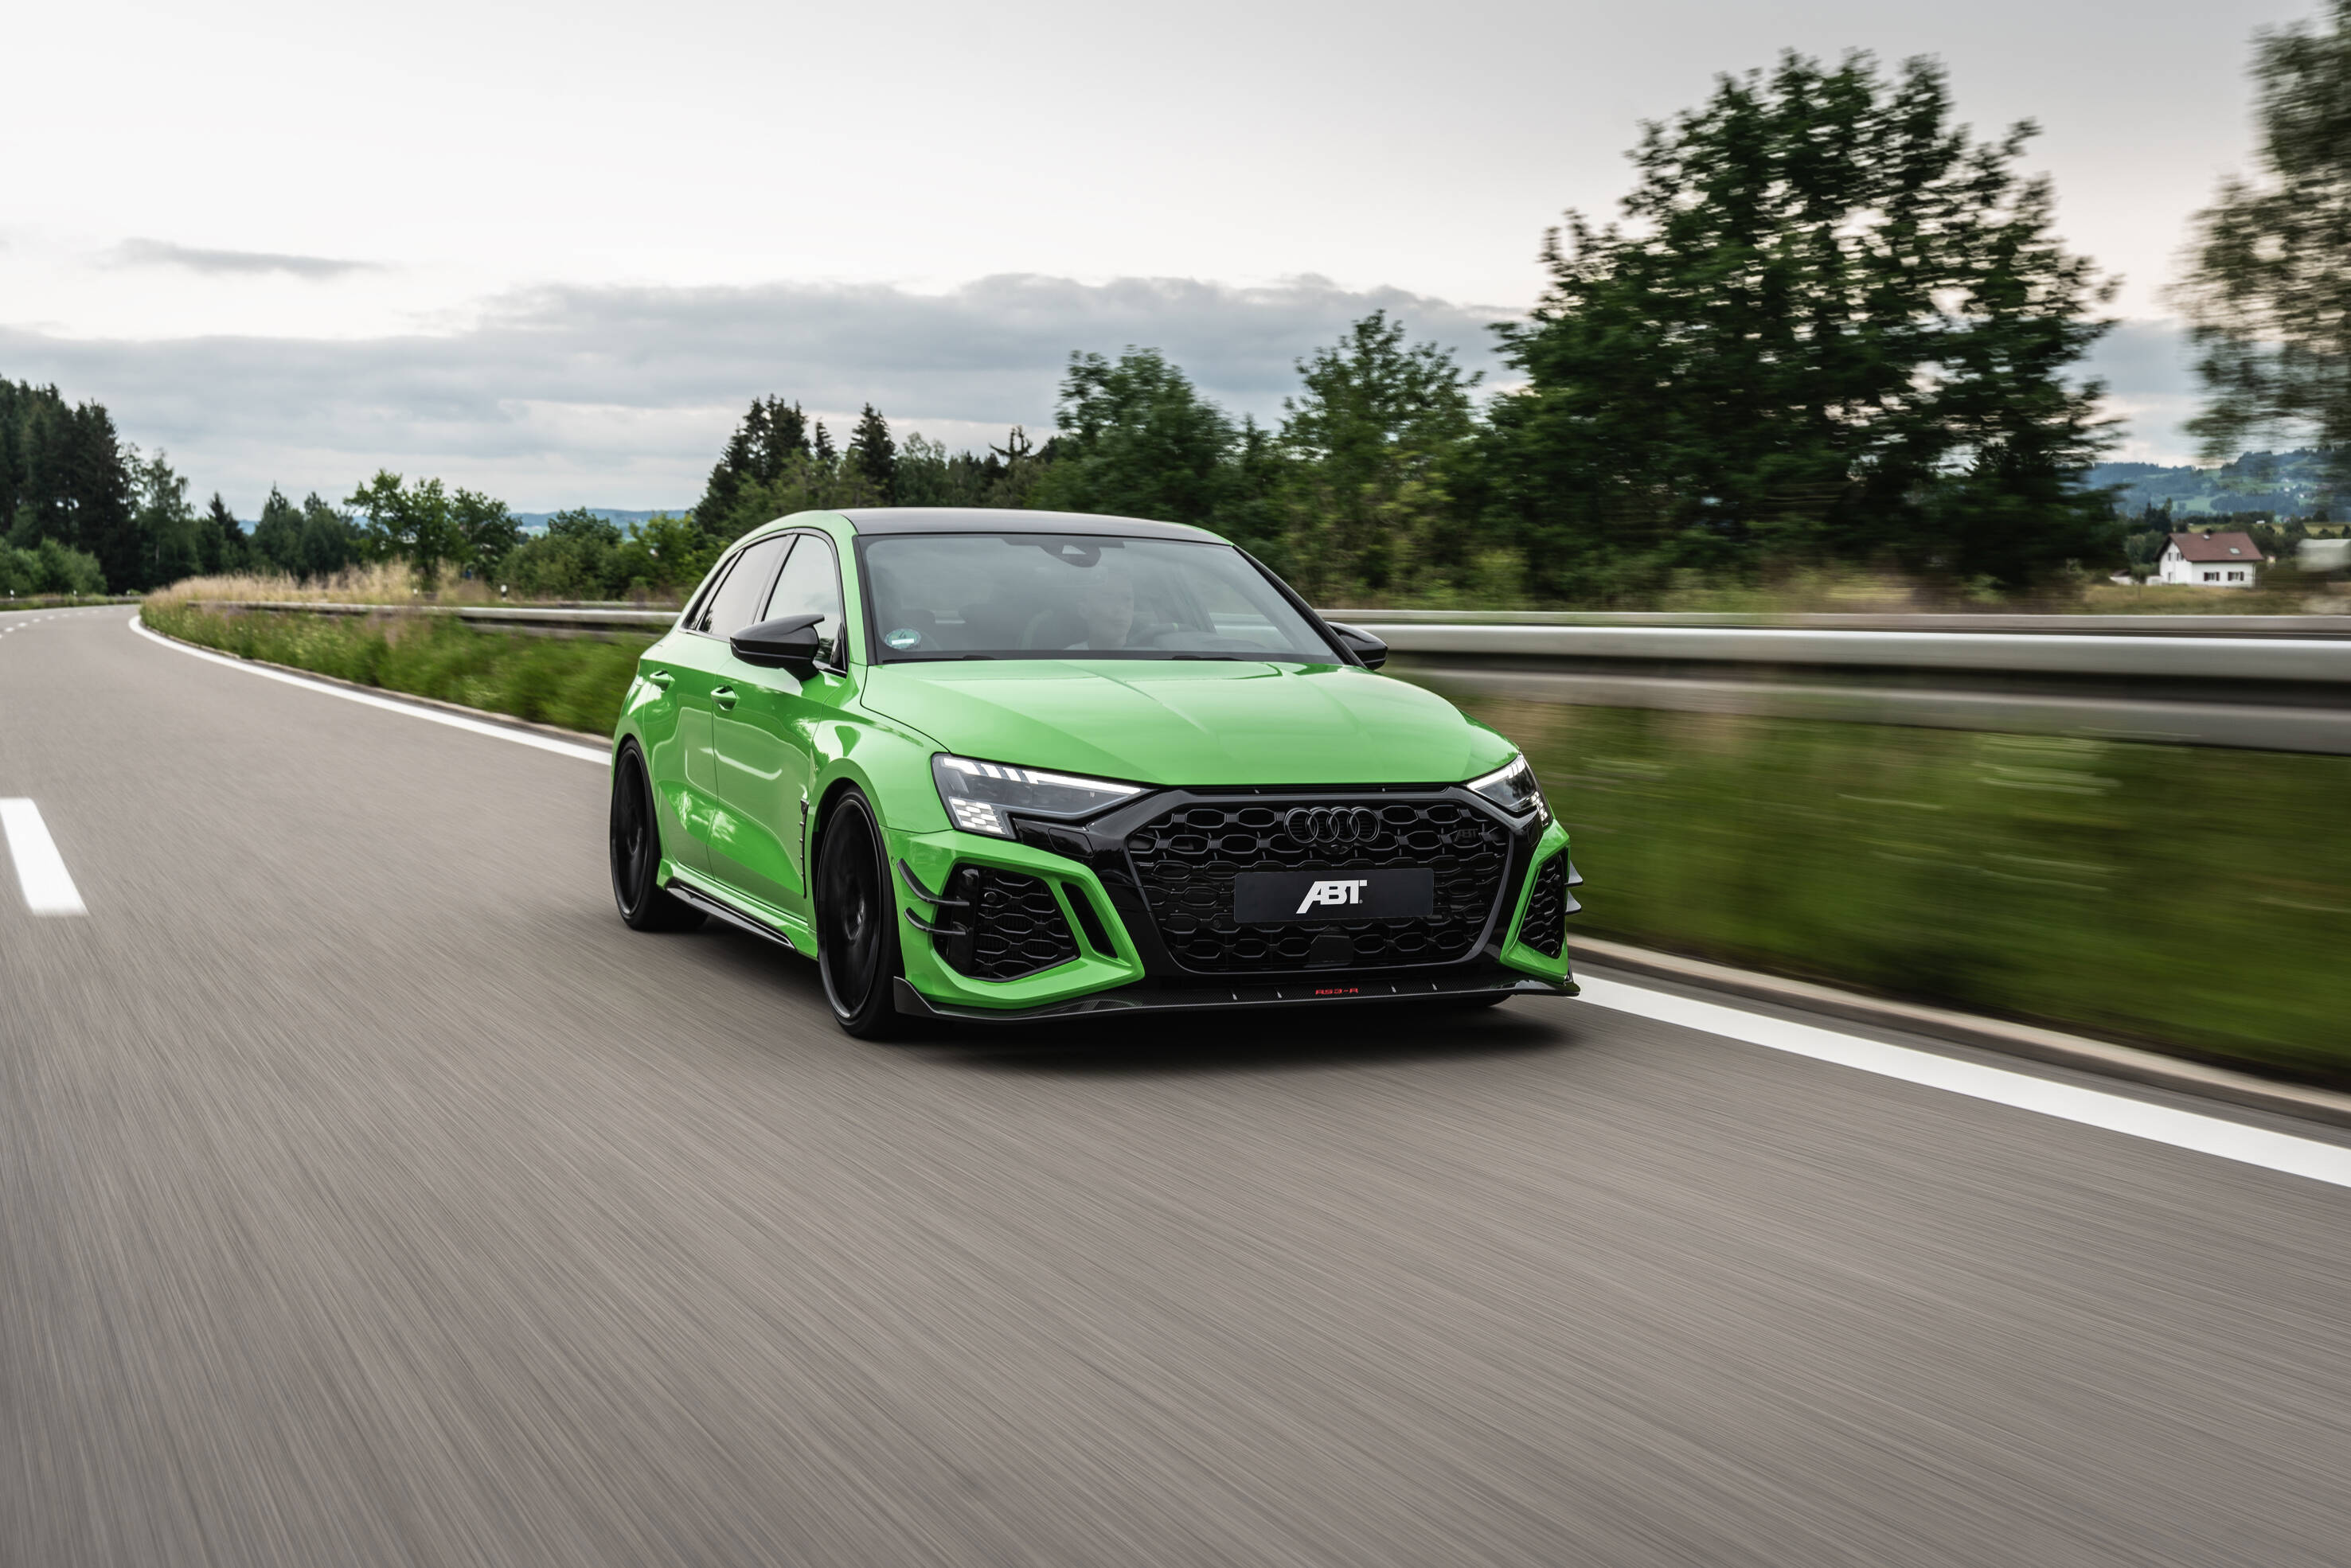 The new Audi RS 3 compact sports car with 400 hp and 500 Nm